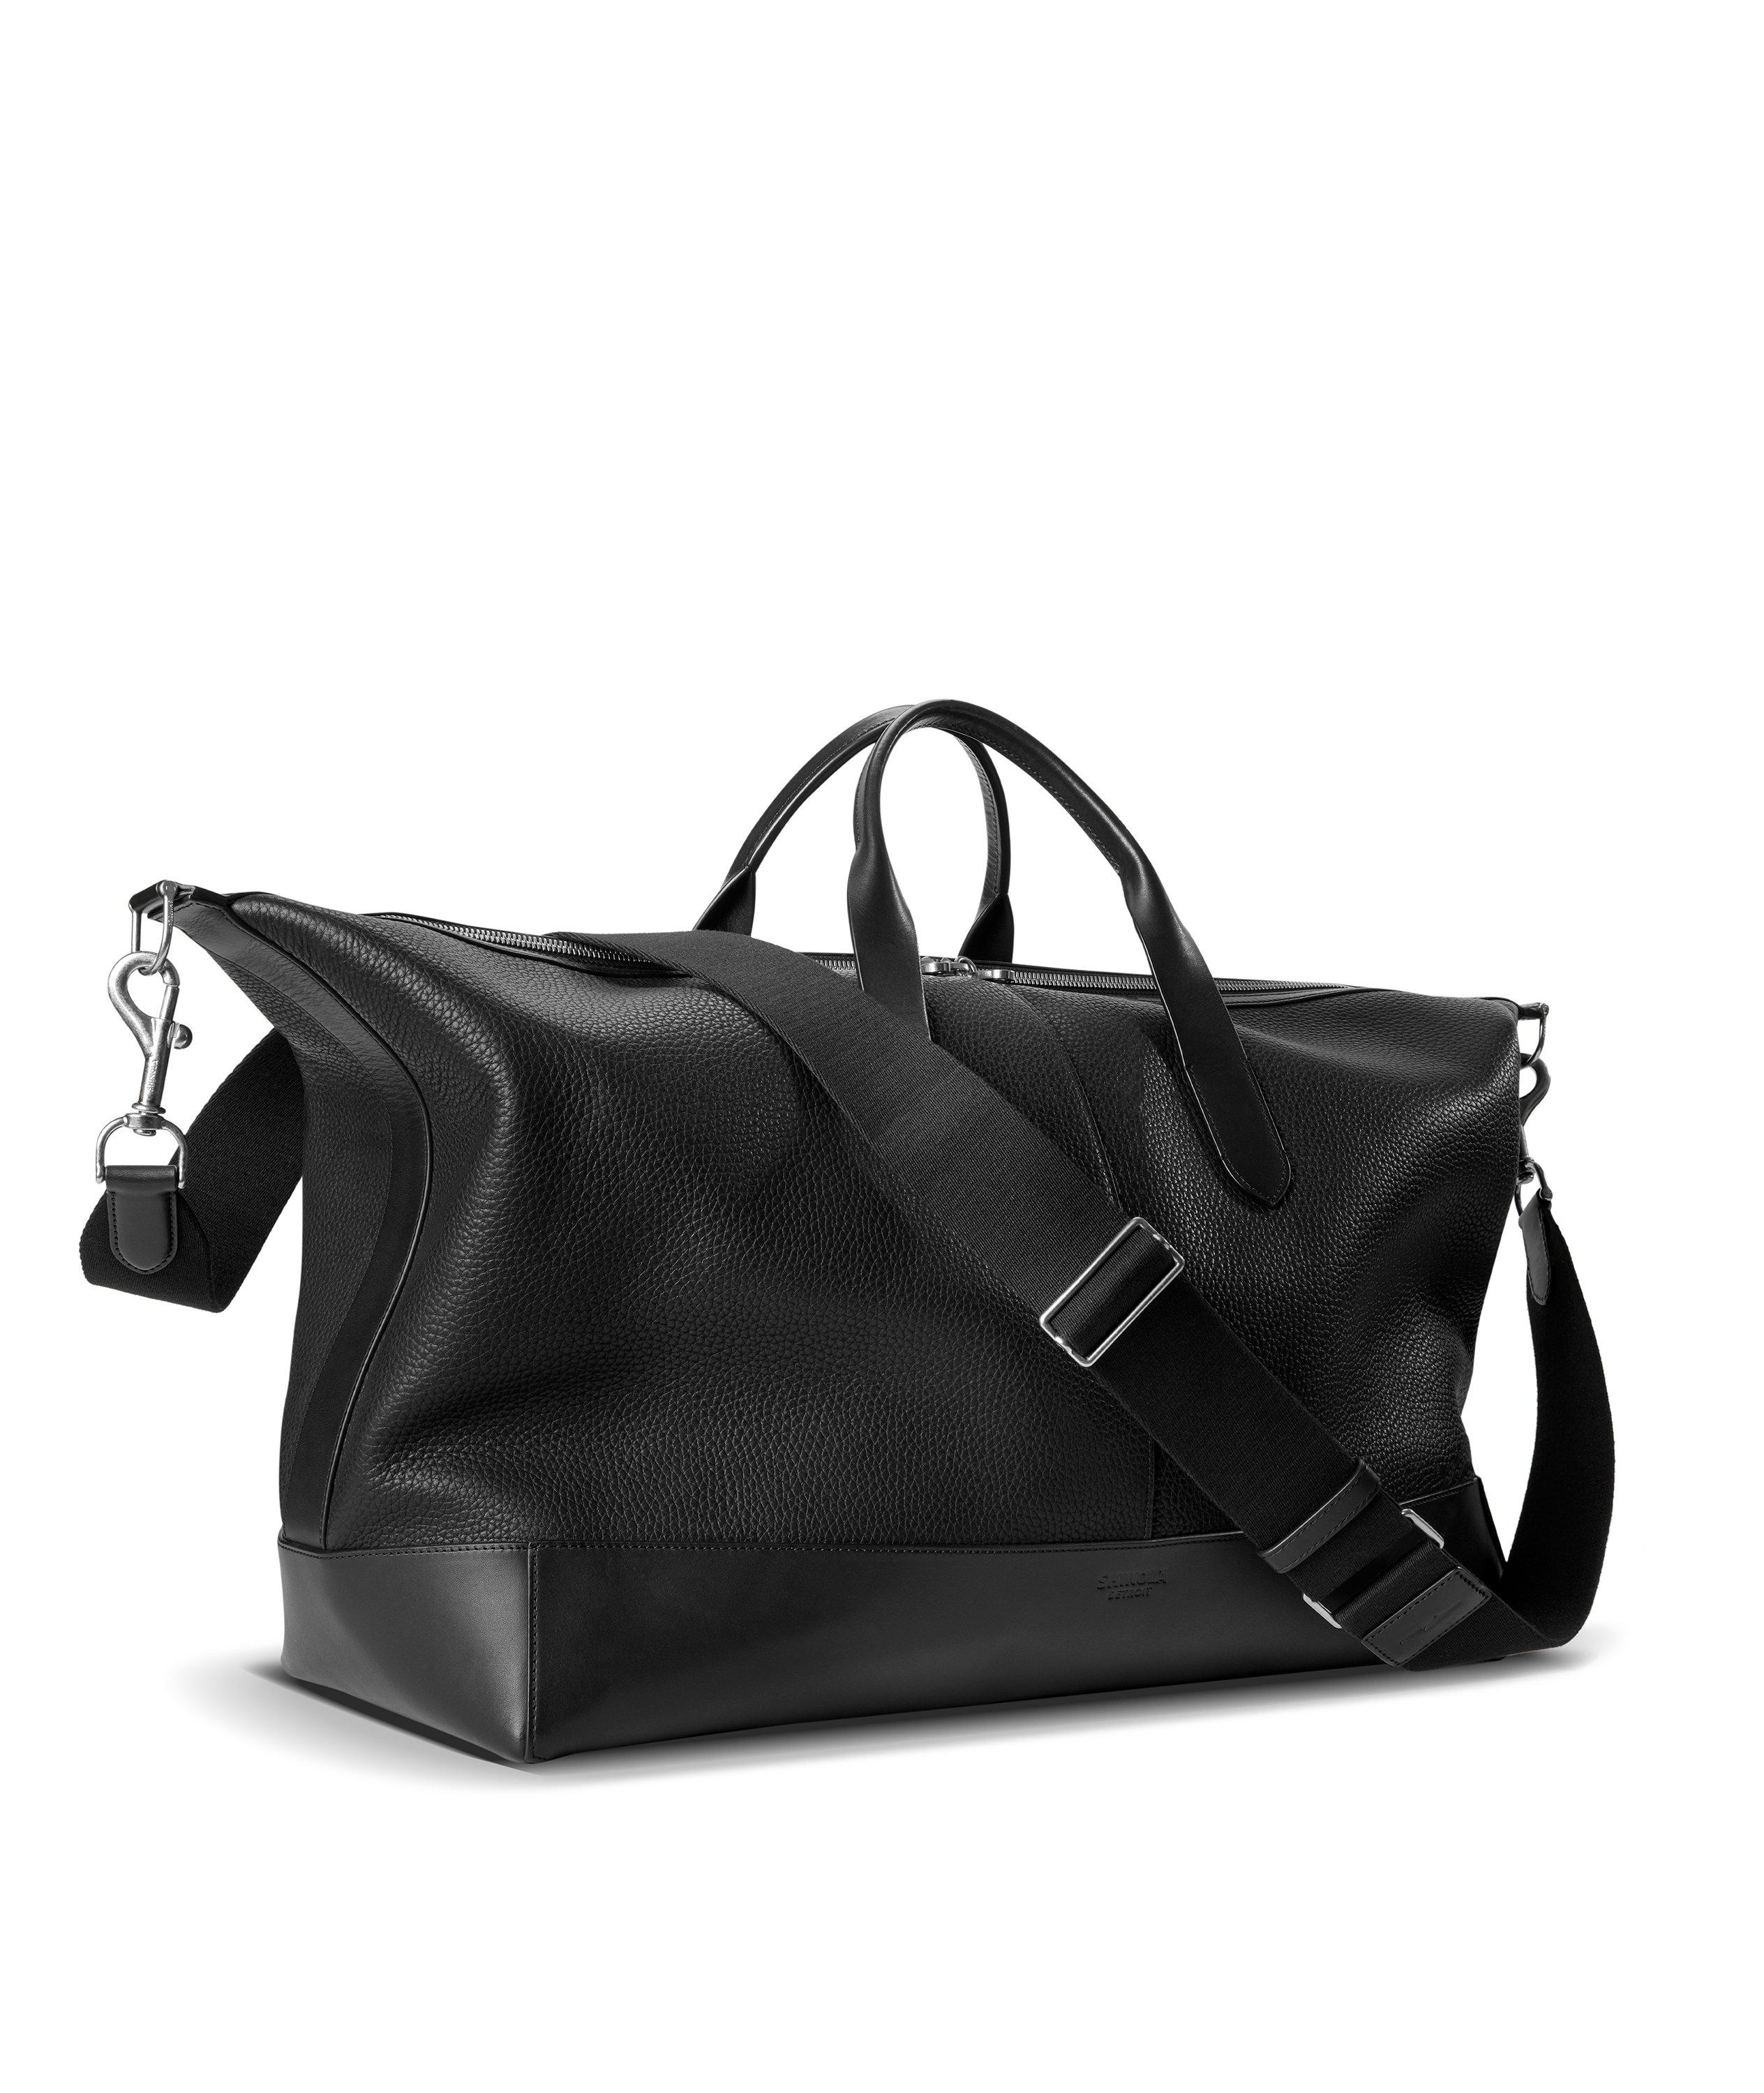 Canfield Classic Holdall Duffle Bag  image 1